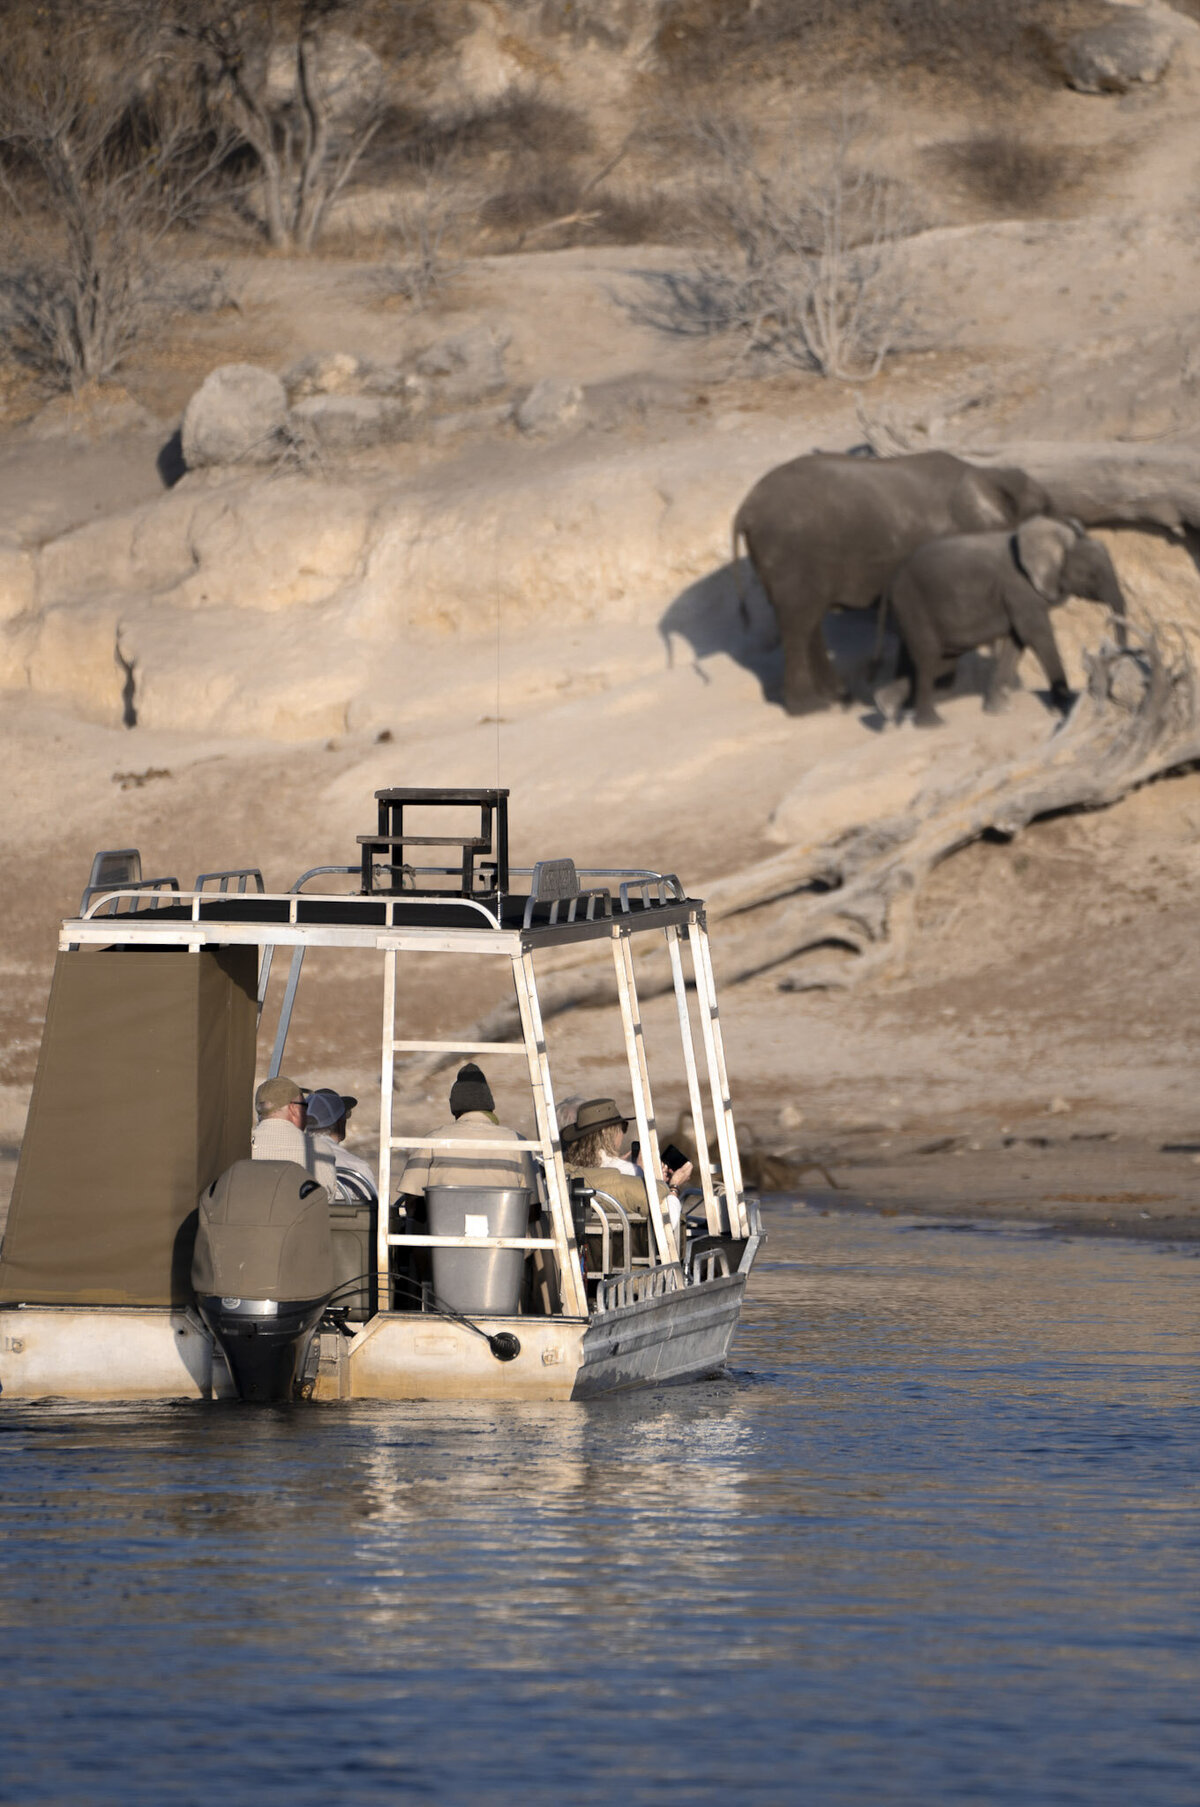 Chobe National Park Chobe River Cruise with Elephants at Watering Hole_By Stephanie Vermillion